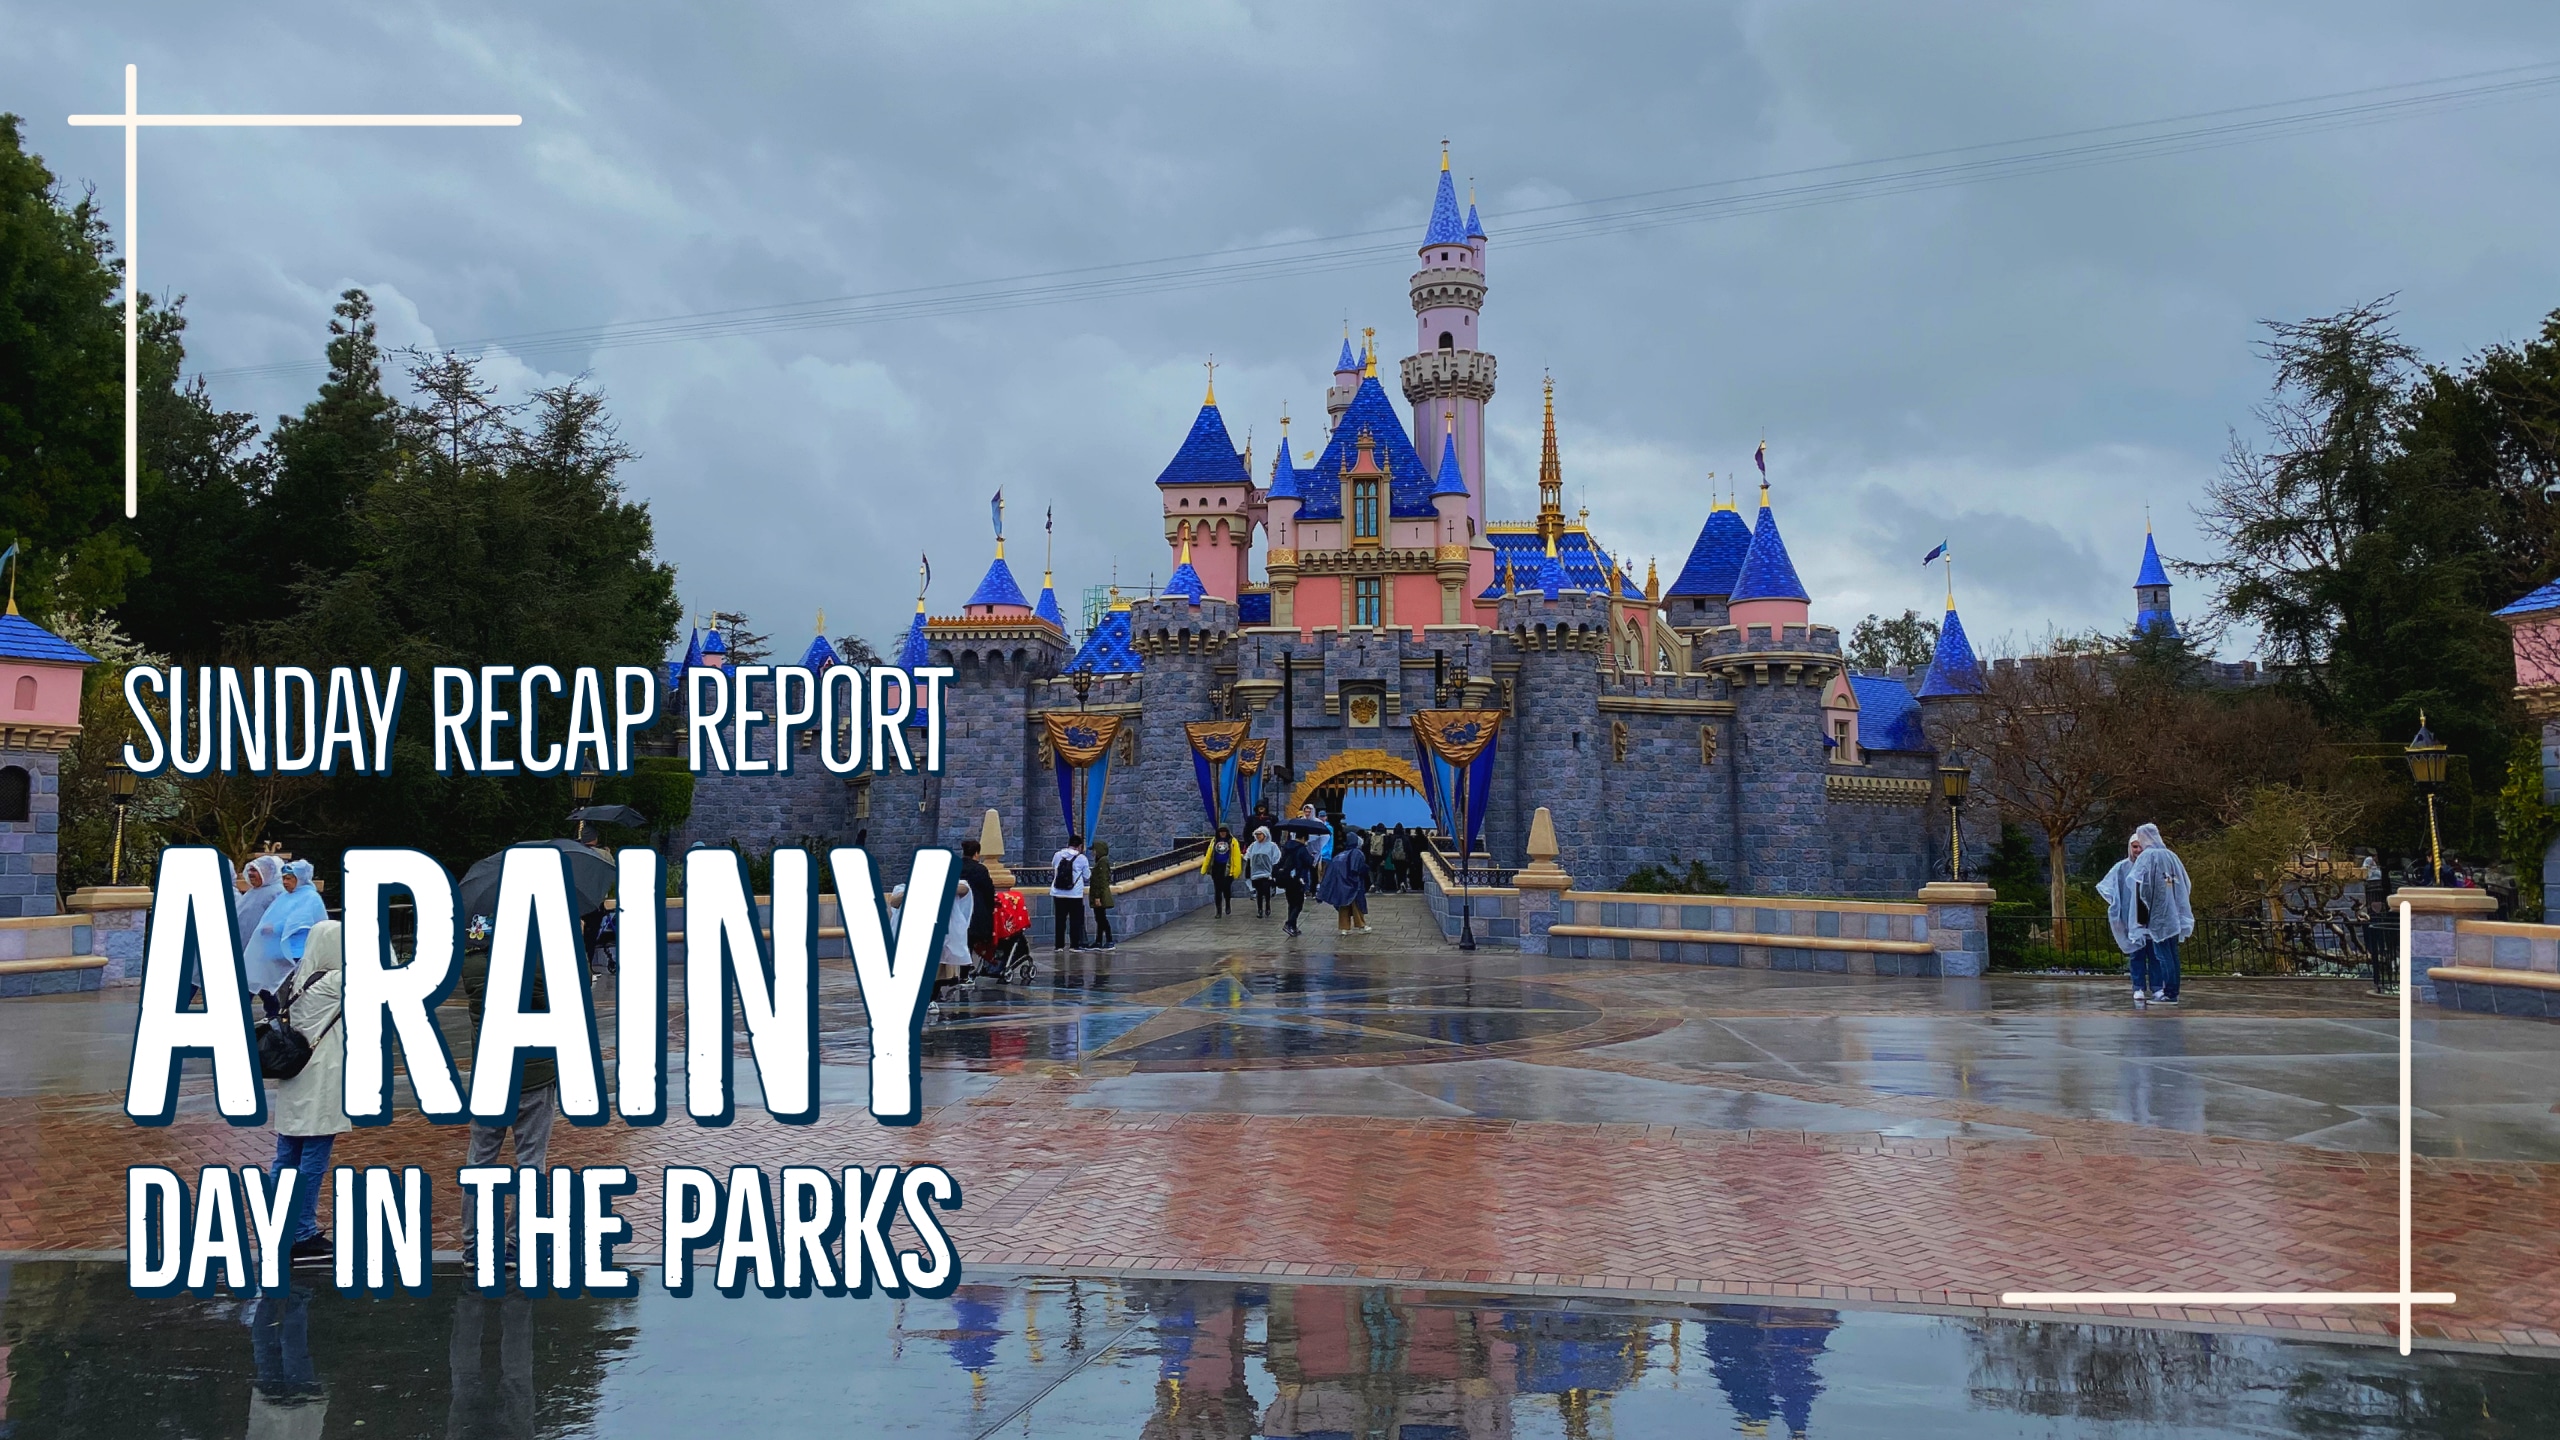 A Rainy Day in the Parks - Sunday Recap Report